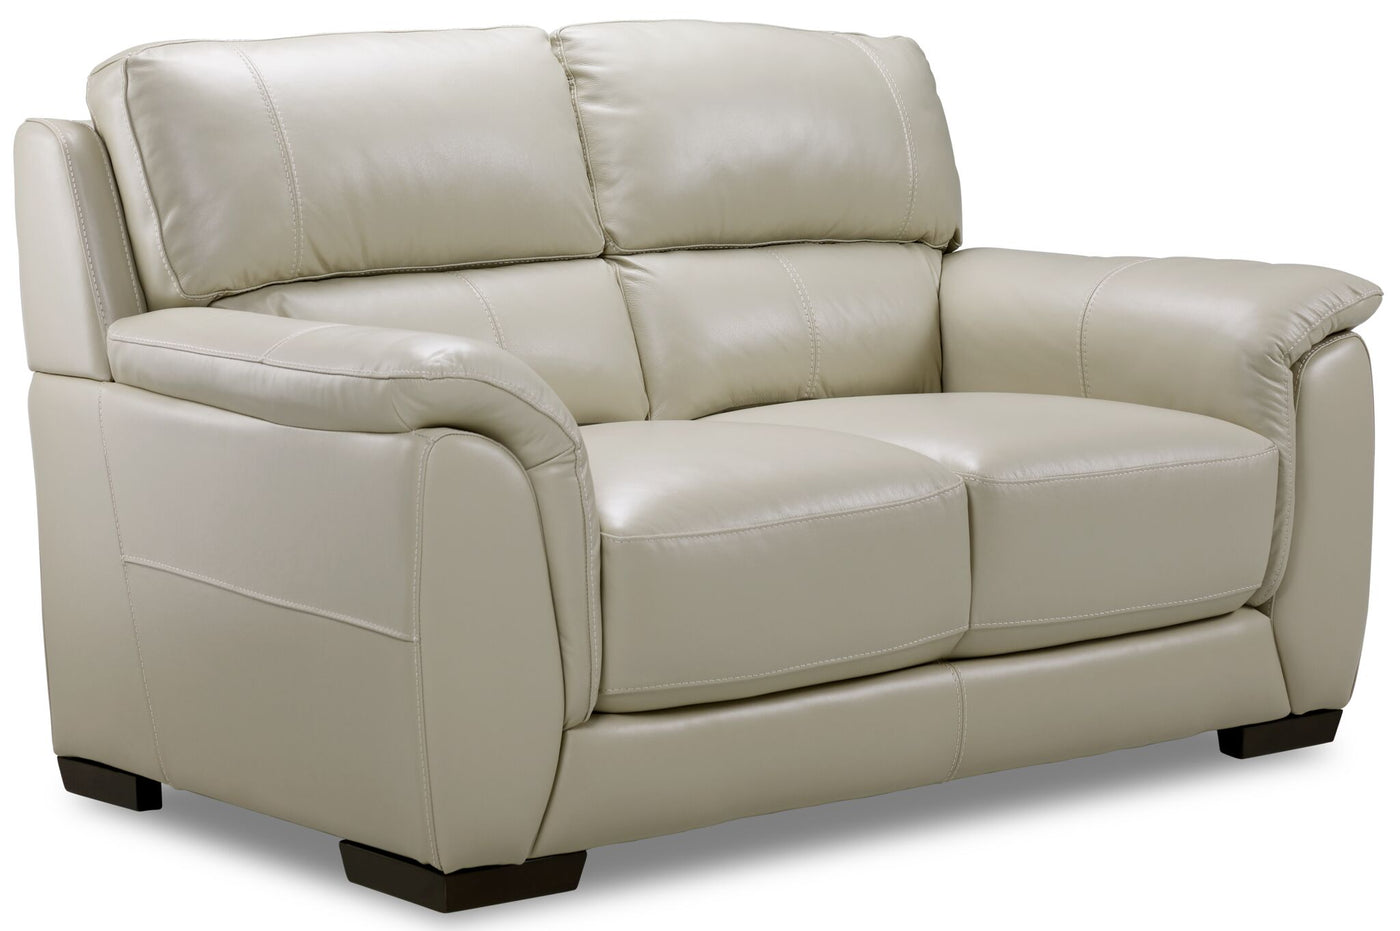 Avalon Leather Sofa and Loveseat Set - Oyster Grey Cream